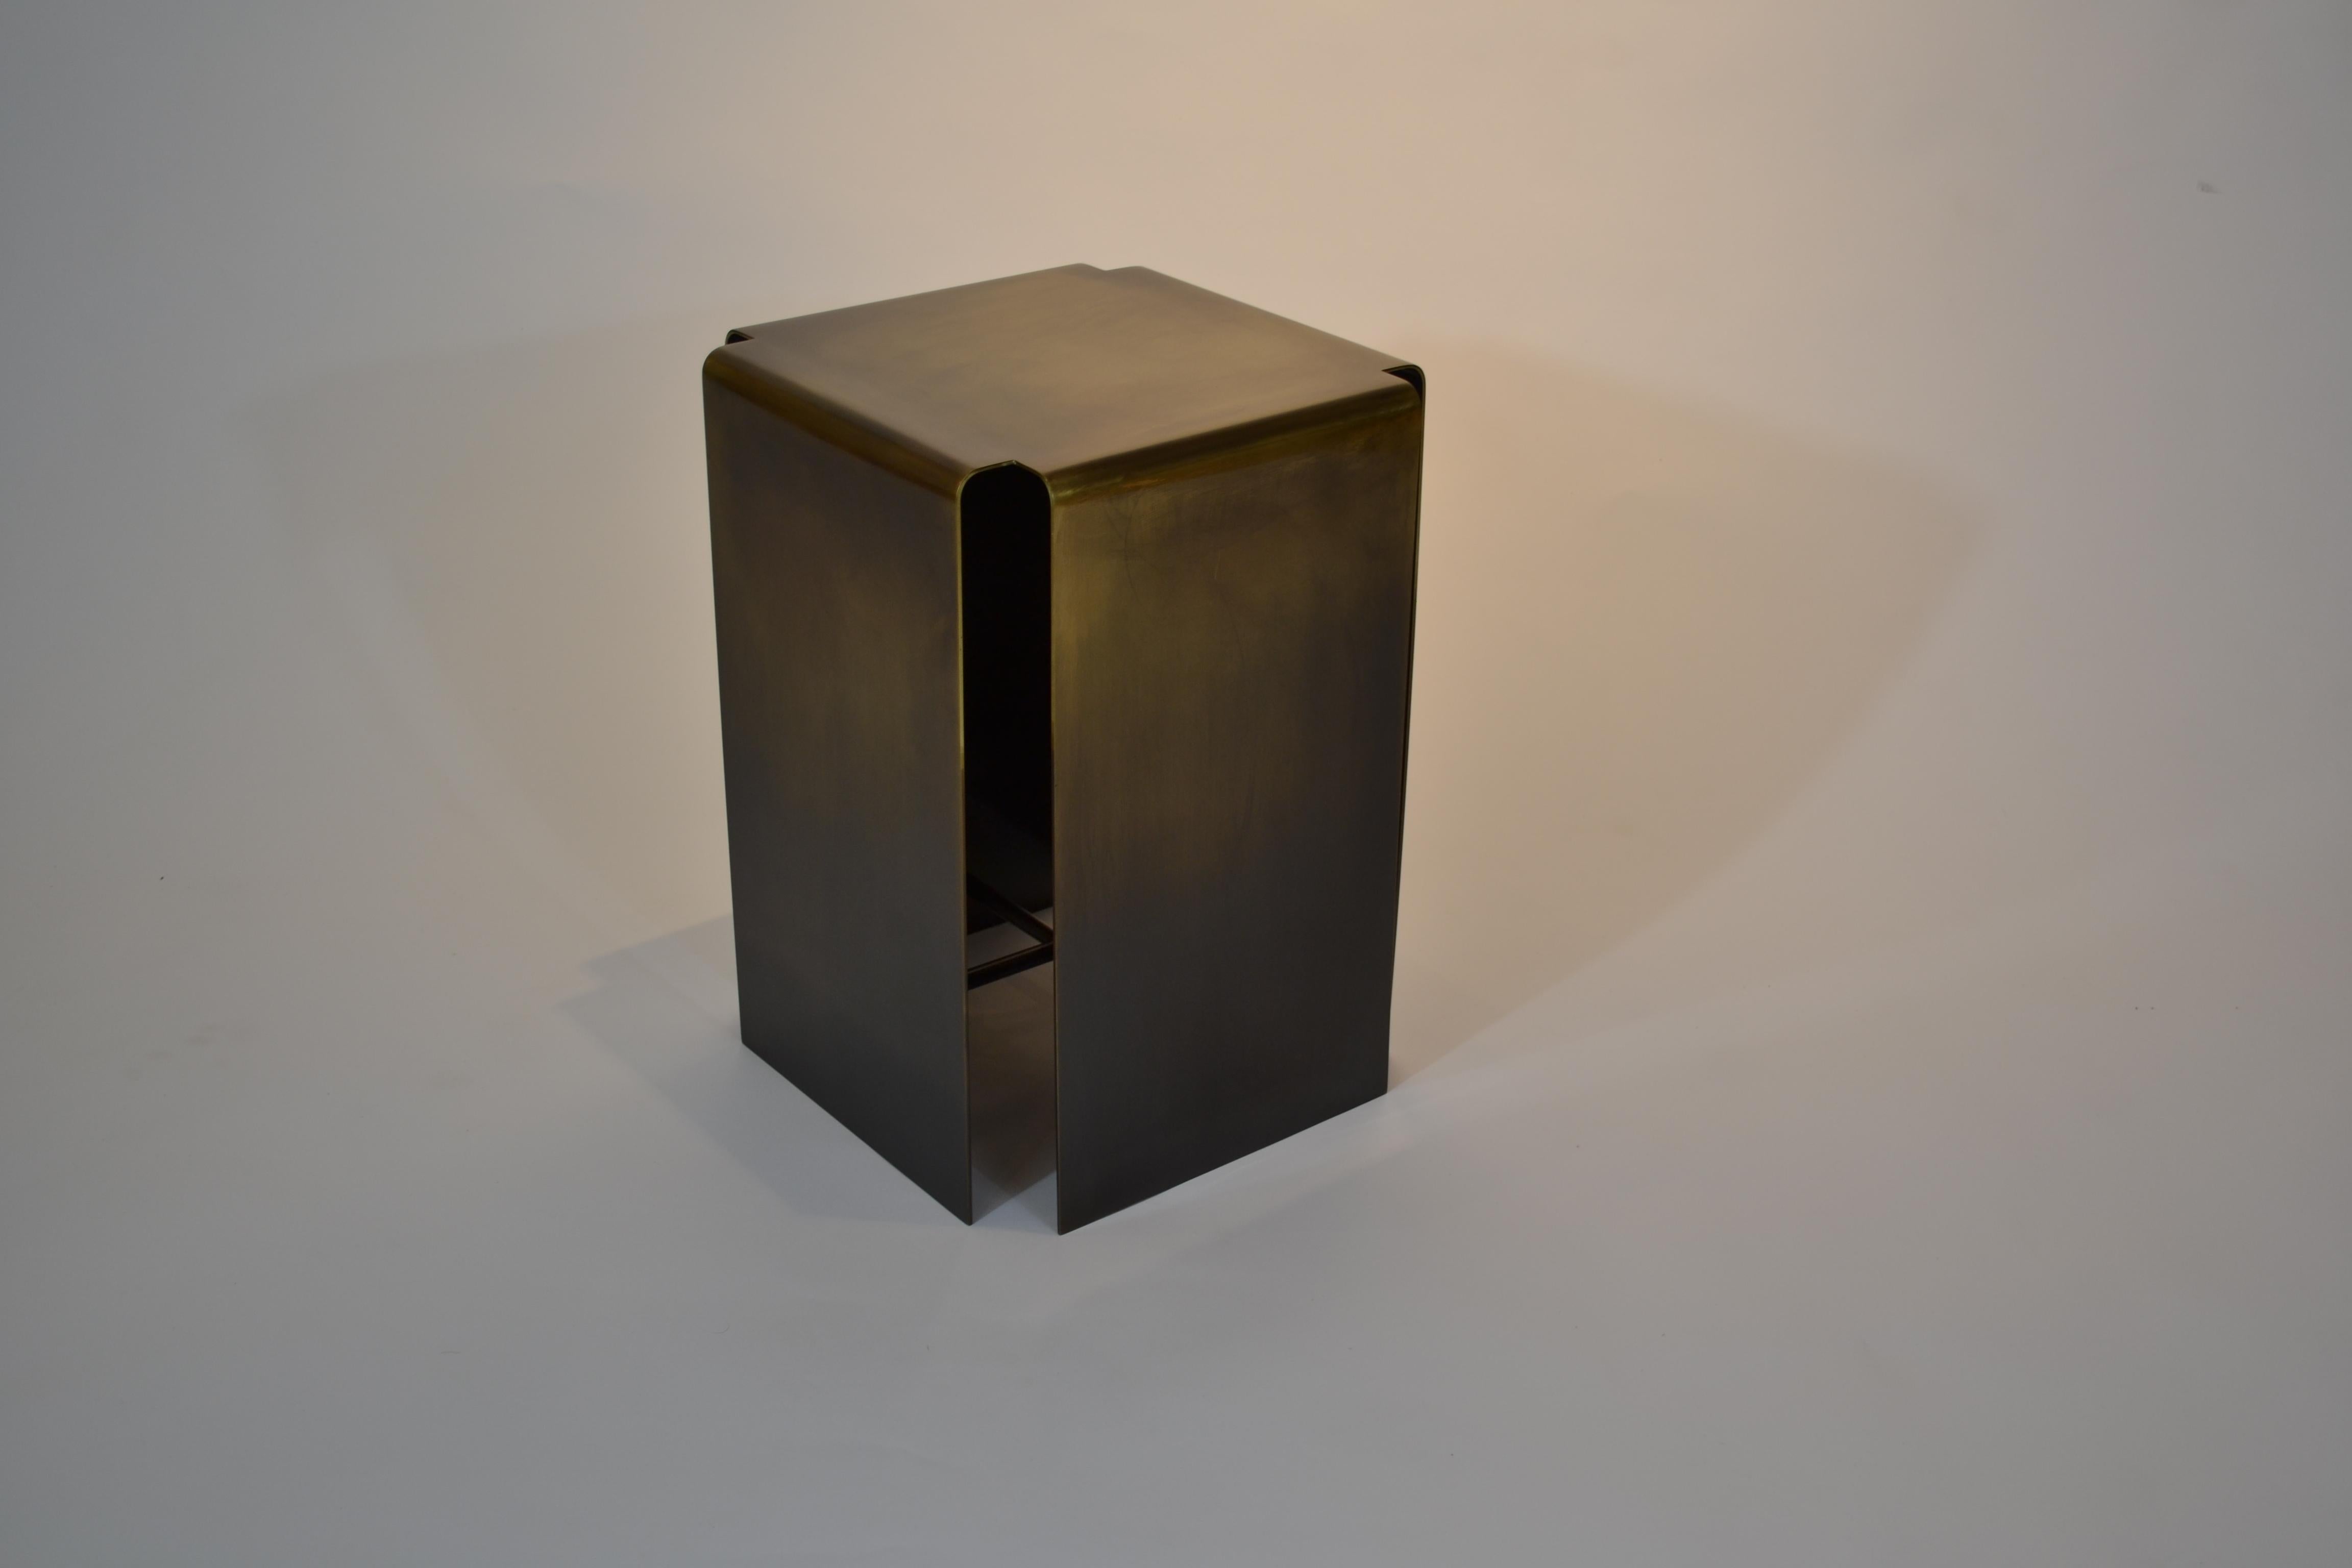 Baltic darkened bronze side table by Gentner Design
Dimensions: D 33 x W 33 x H 48 cm
Materials: darkened bronze
Available in lightened bronze and darkened bronze. 

The Baltic embodies a conceptual design that is striking in its simplicity;